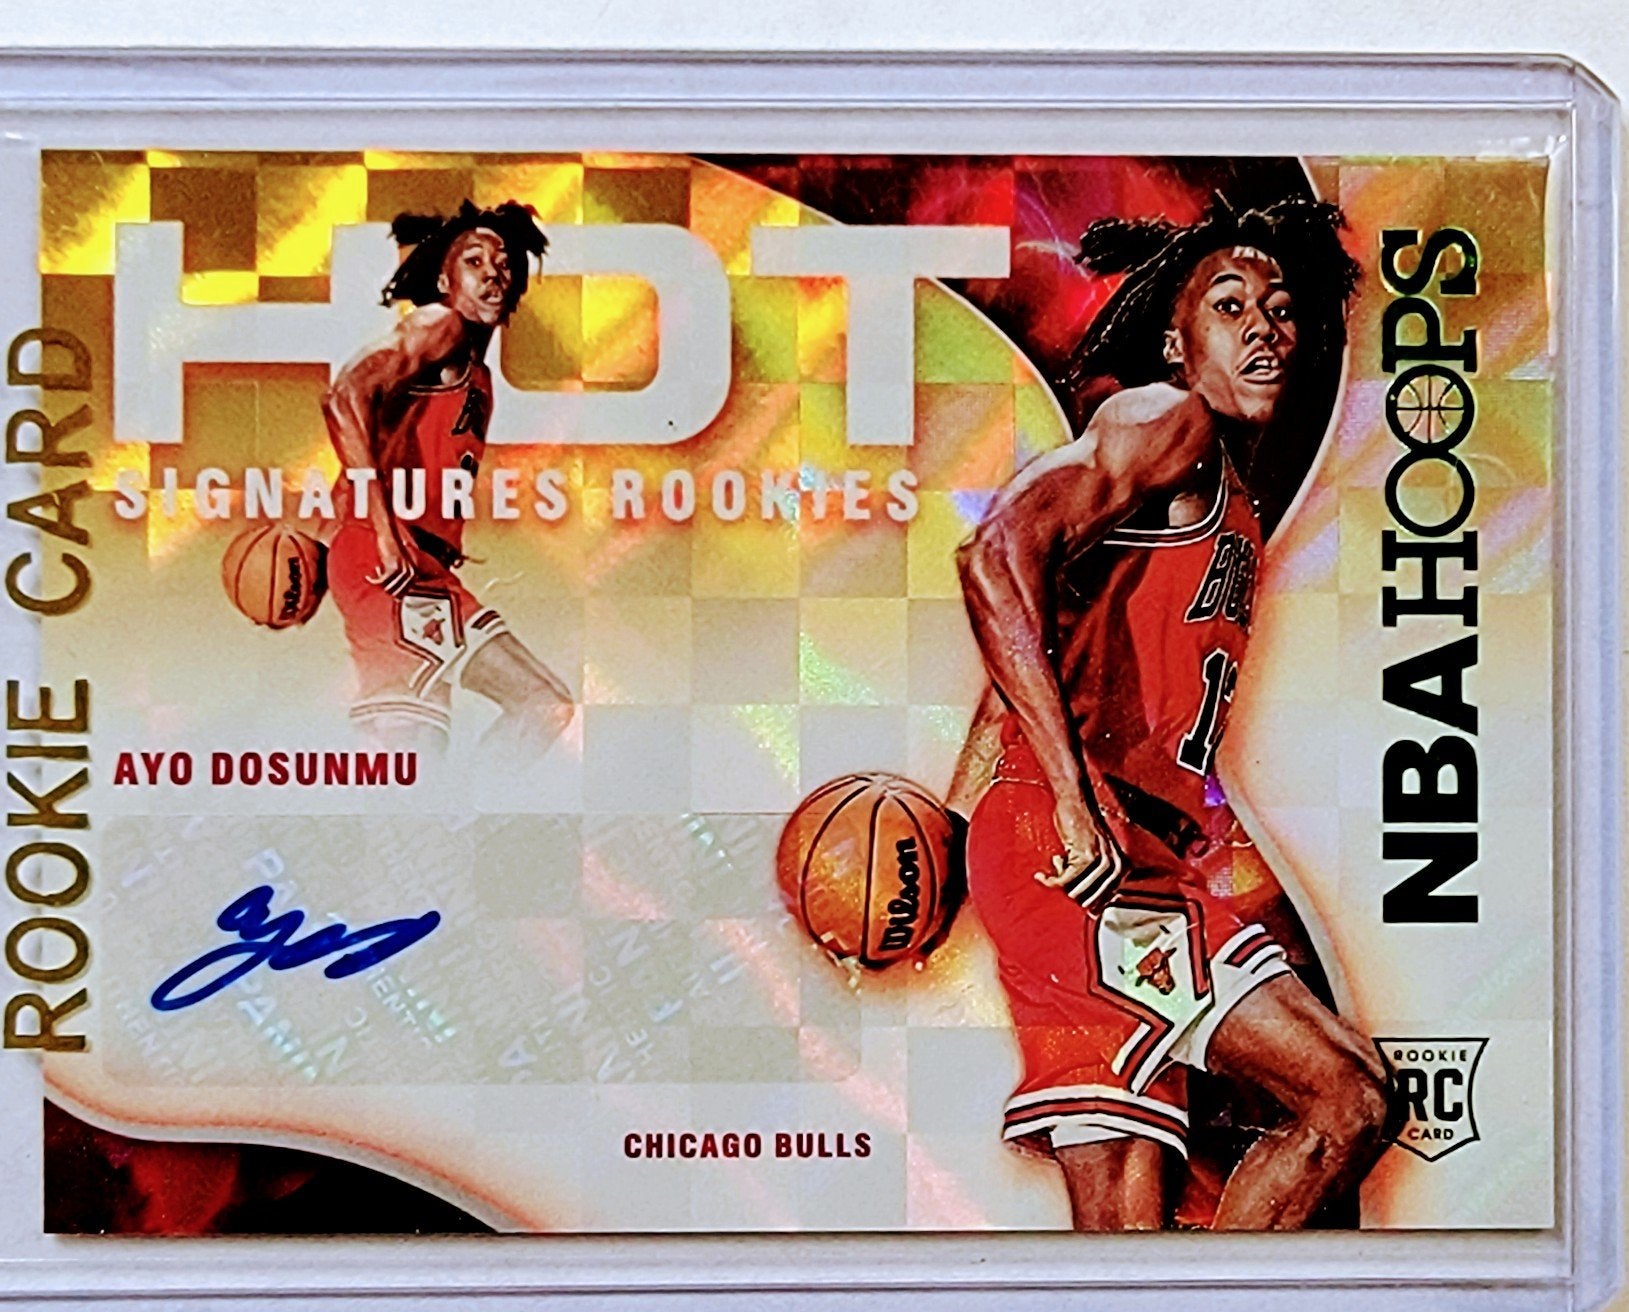 2021-22 Panini NBA Hoops Ayo Dosunmu Hot Signature Rookies Autographed Rookie Basketball Card AVM1 simple Xclusive Collectibles   